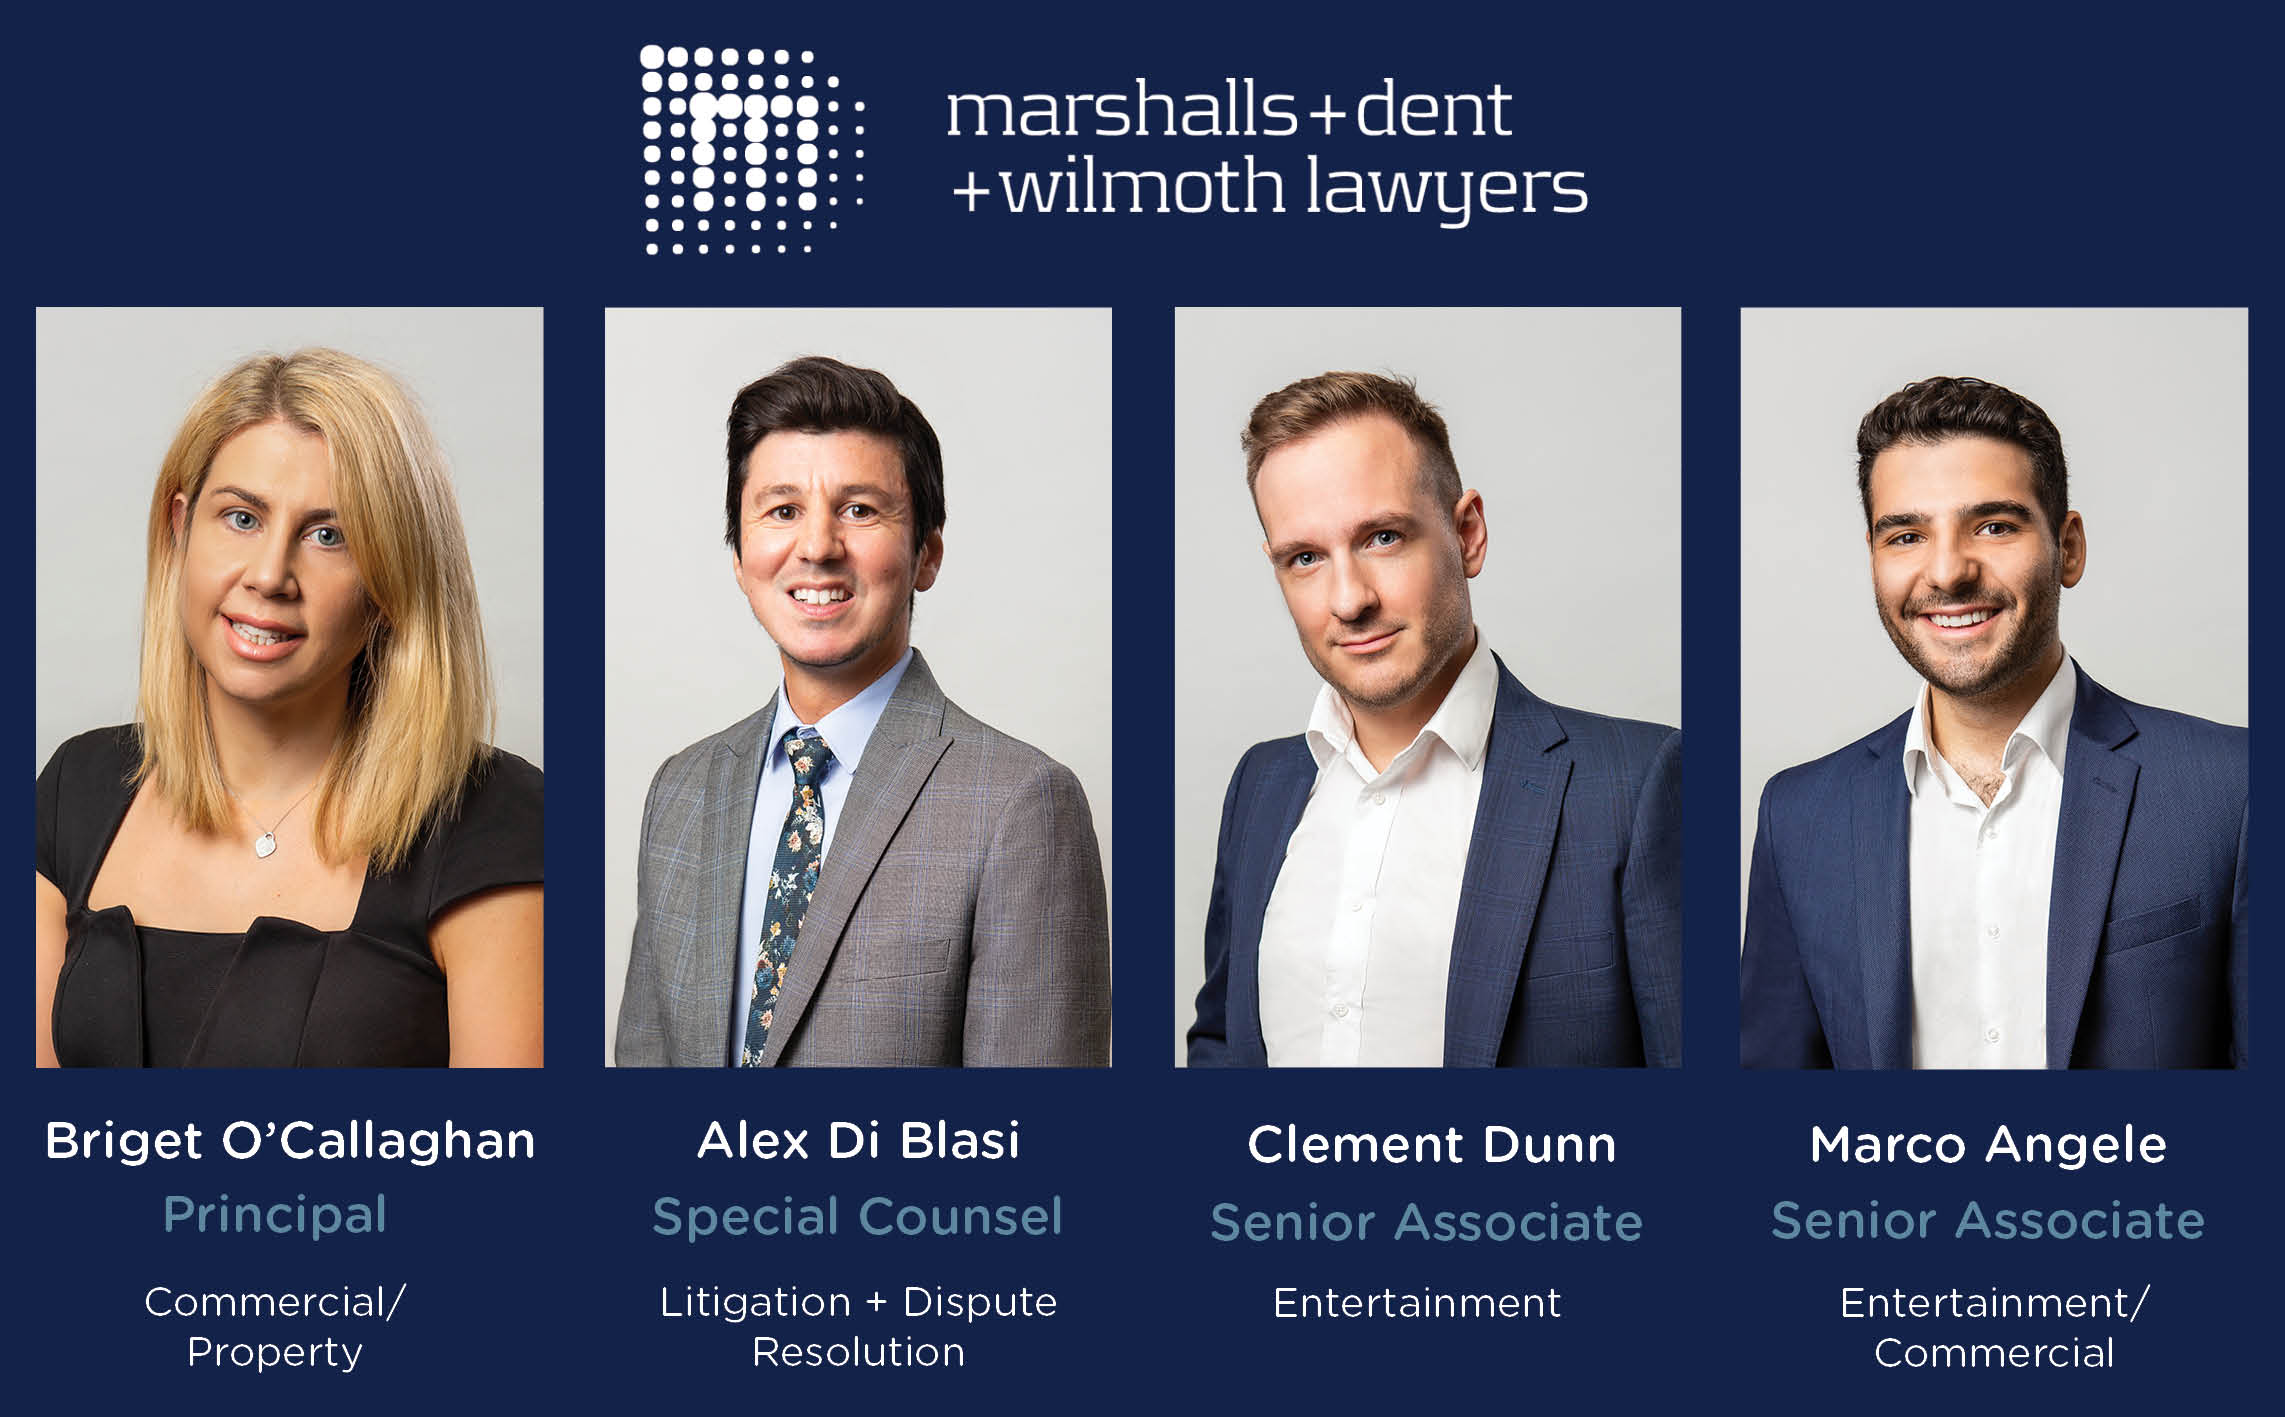 MDW lawyers promoted to key positions in Melbourne office